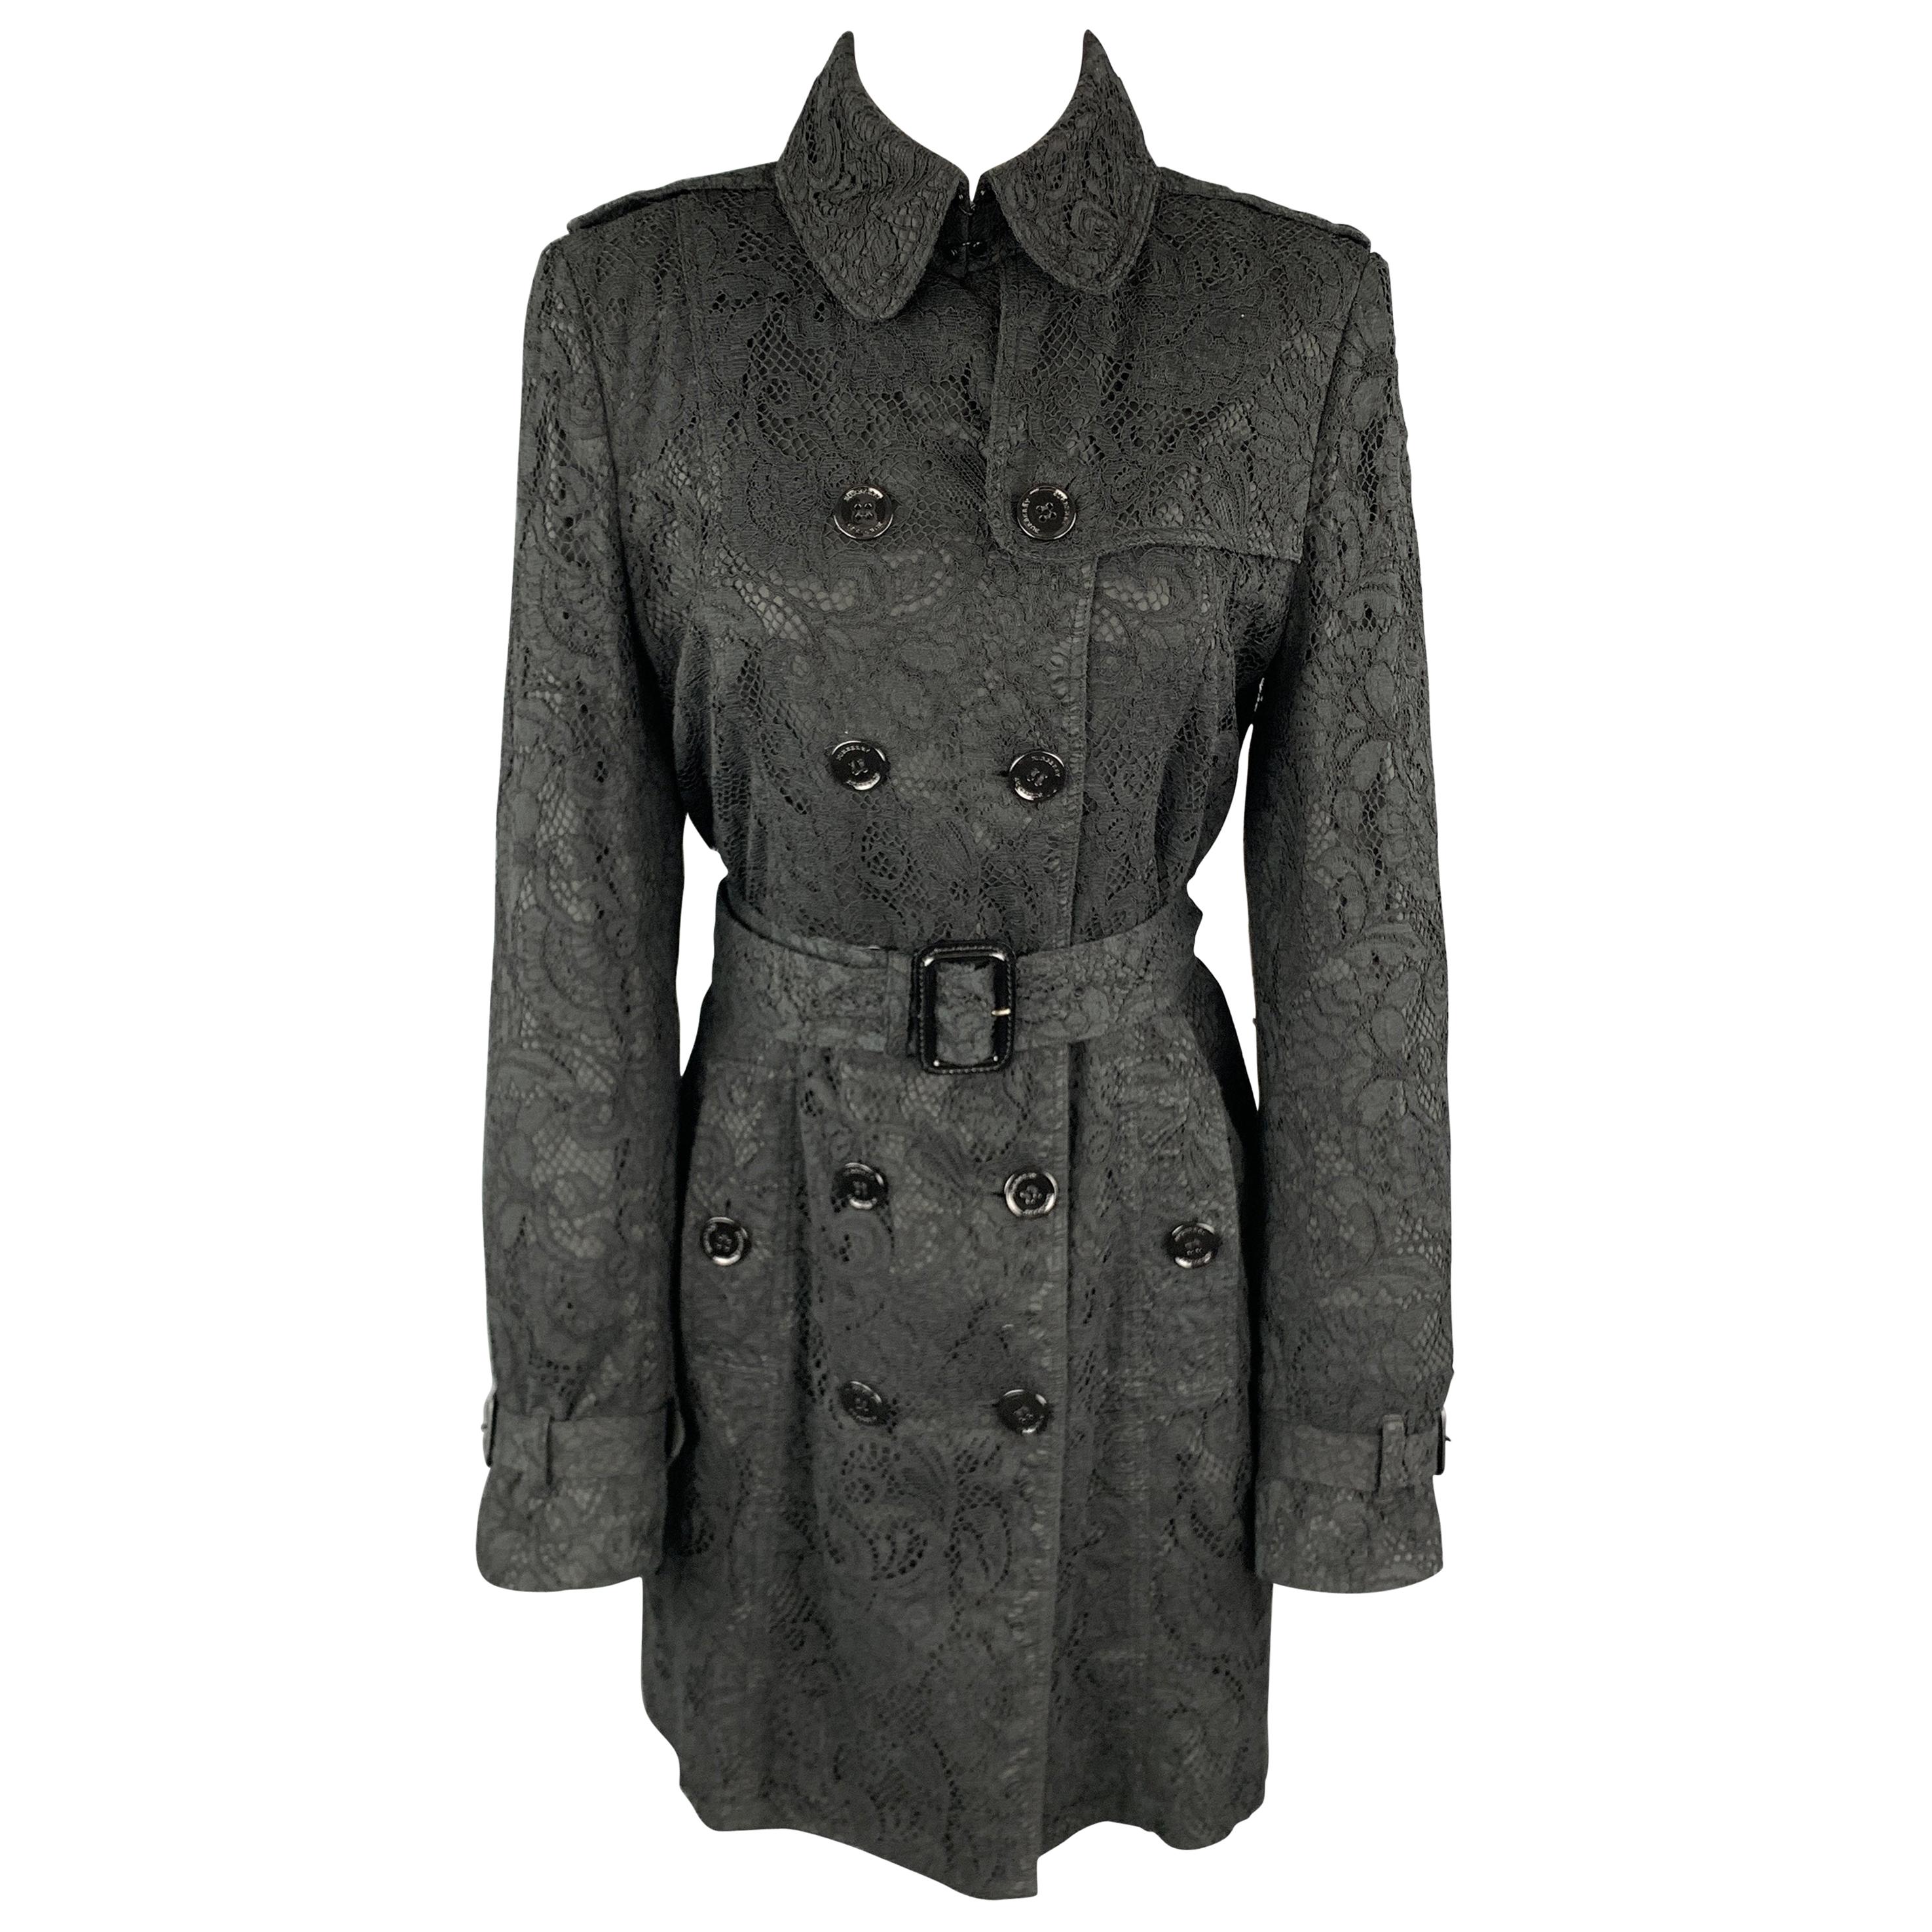 BURBERRY LONDON Size M Black Lace Double Breasted Trench Coat